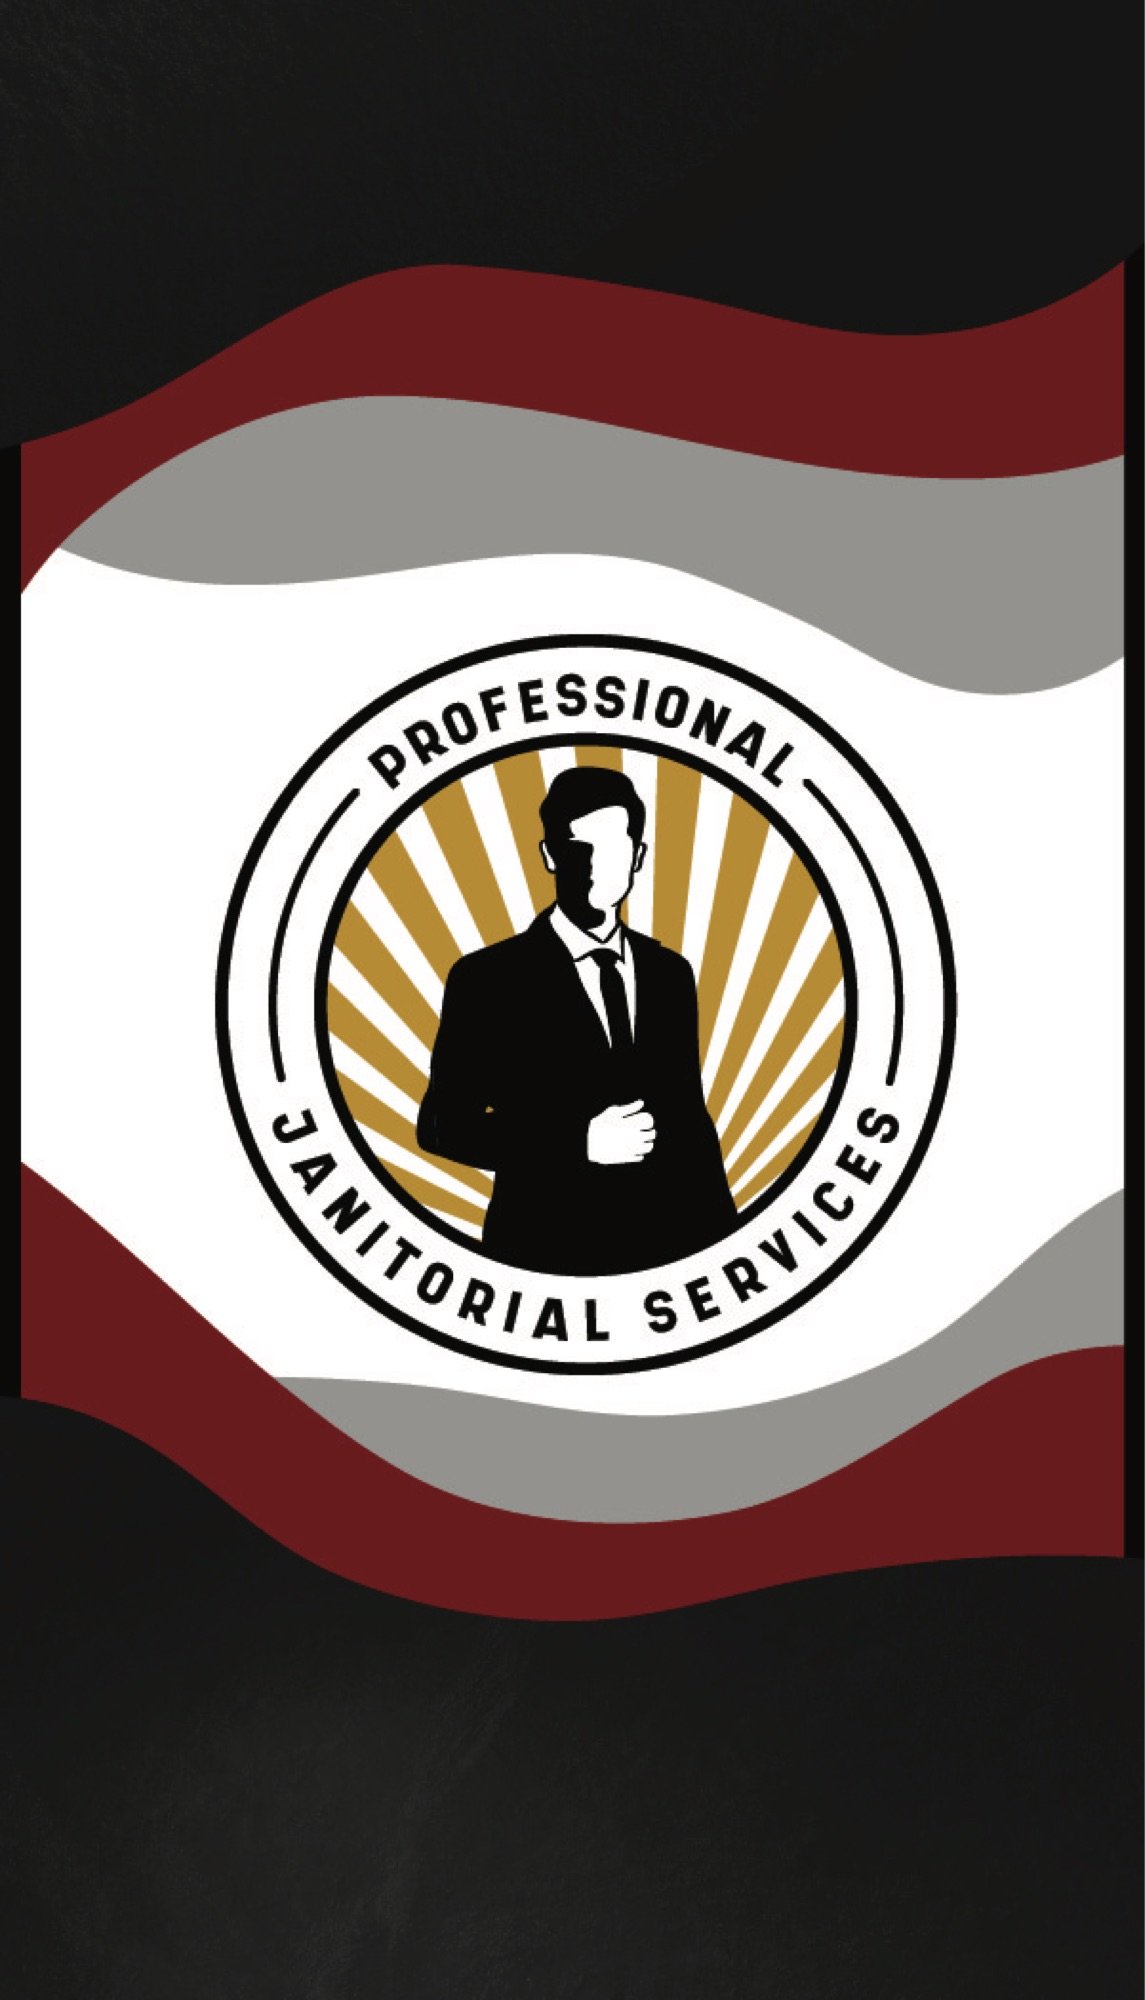 Professional Janitorial Services Logo